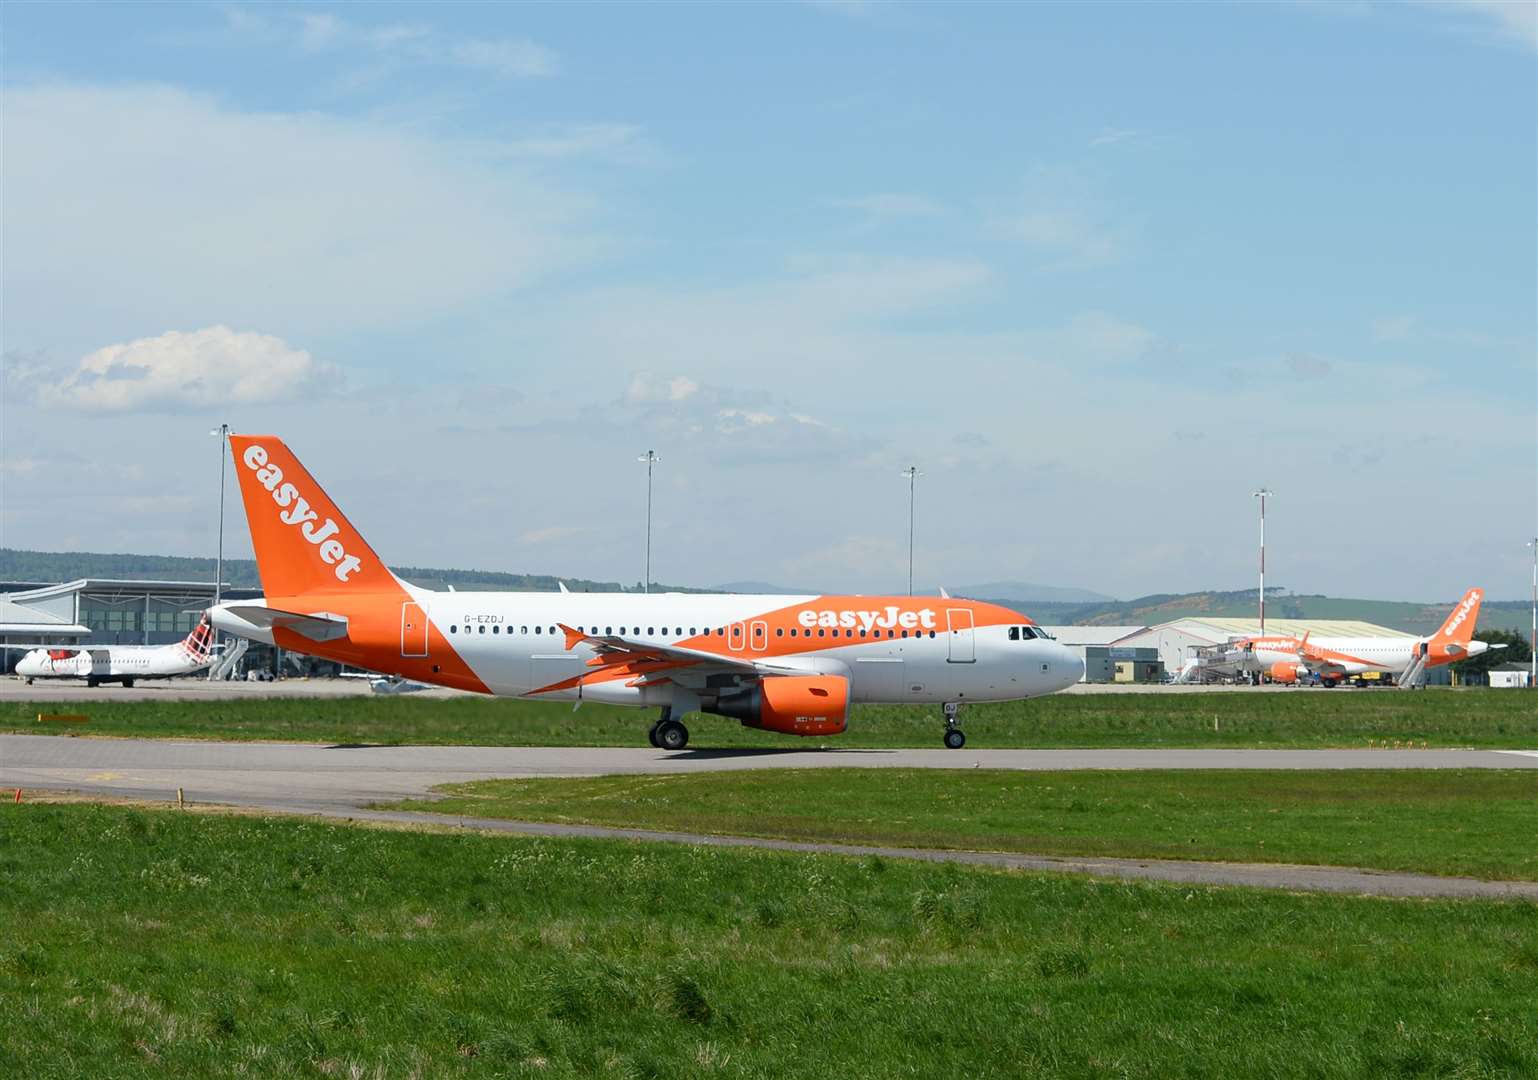 An Easy Jet plane at Inverness Airport. Picture: Gary Anthony.